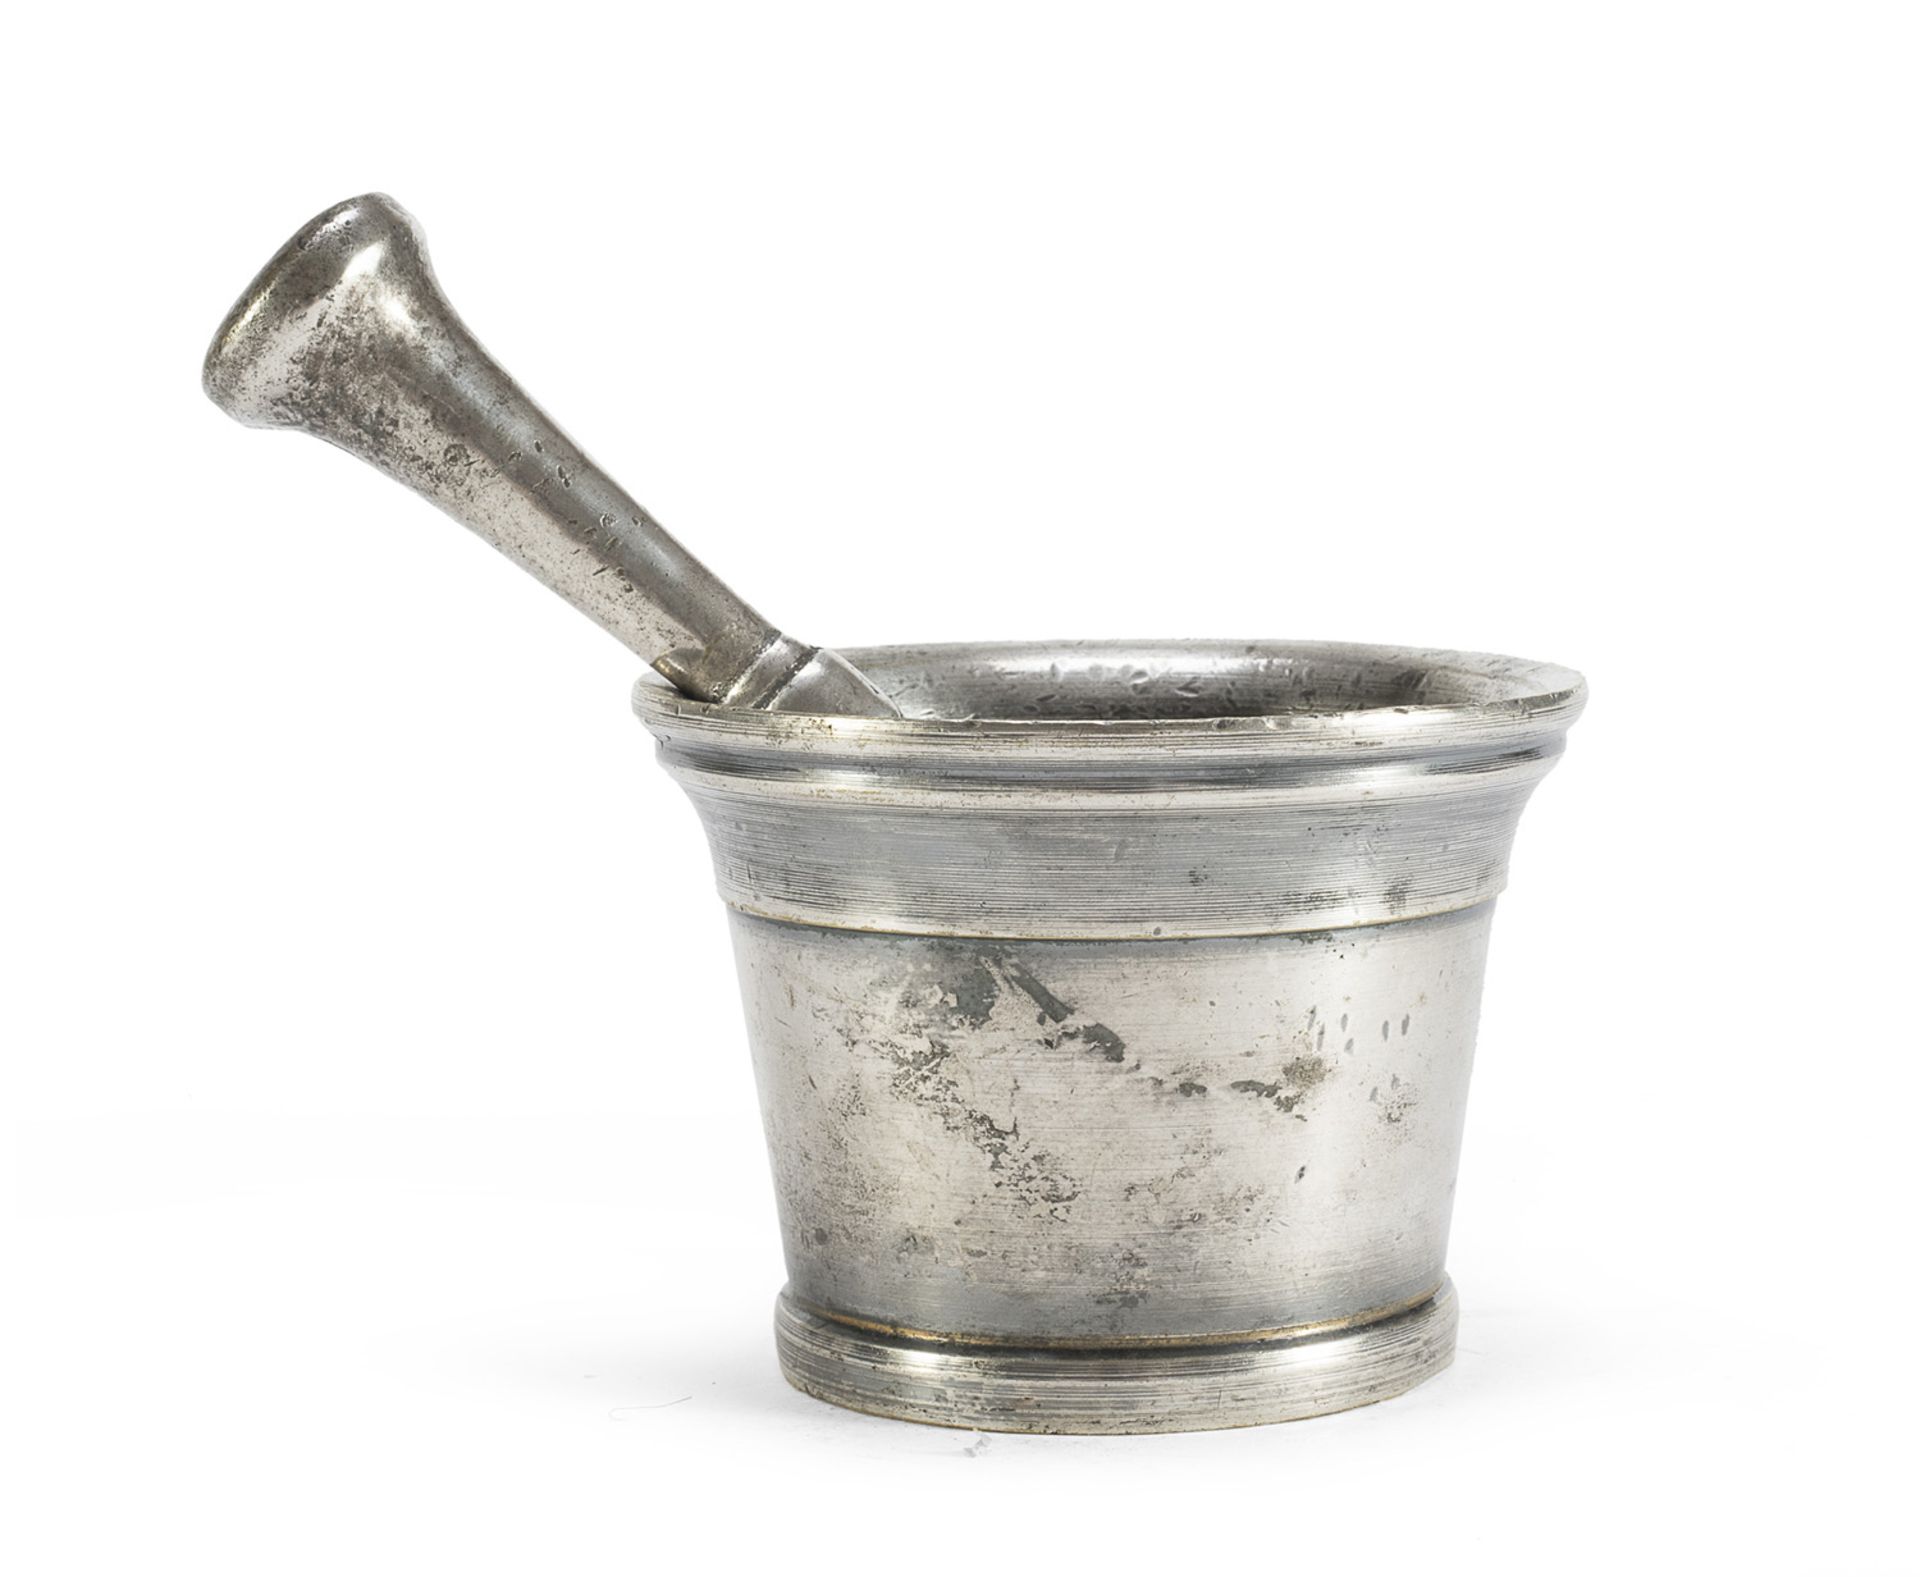 SILVER BRONZE MORTAR WITH PESTLE LATE 18th CENTURY